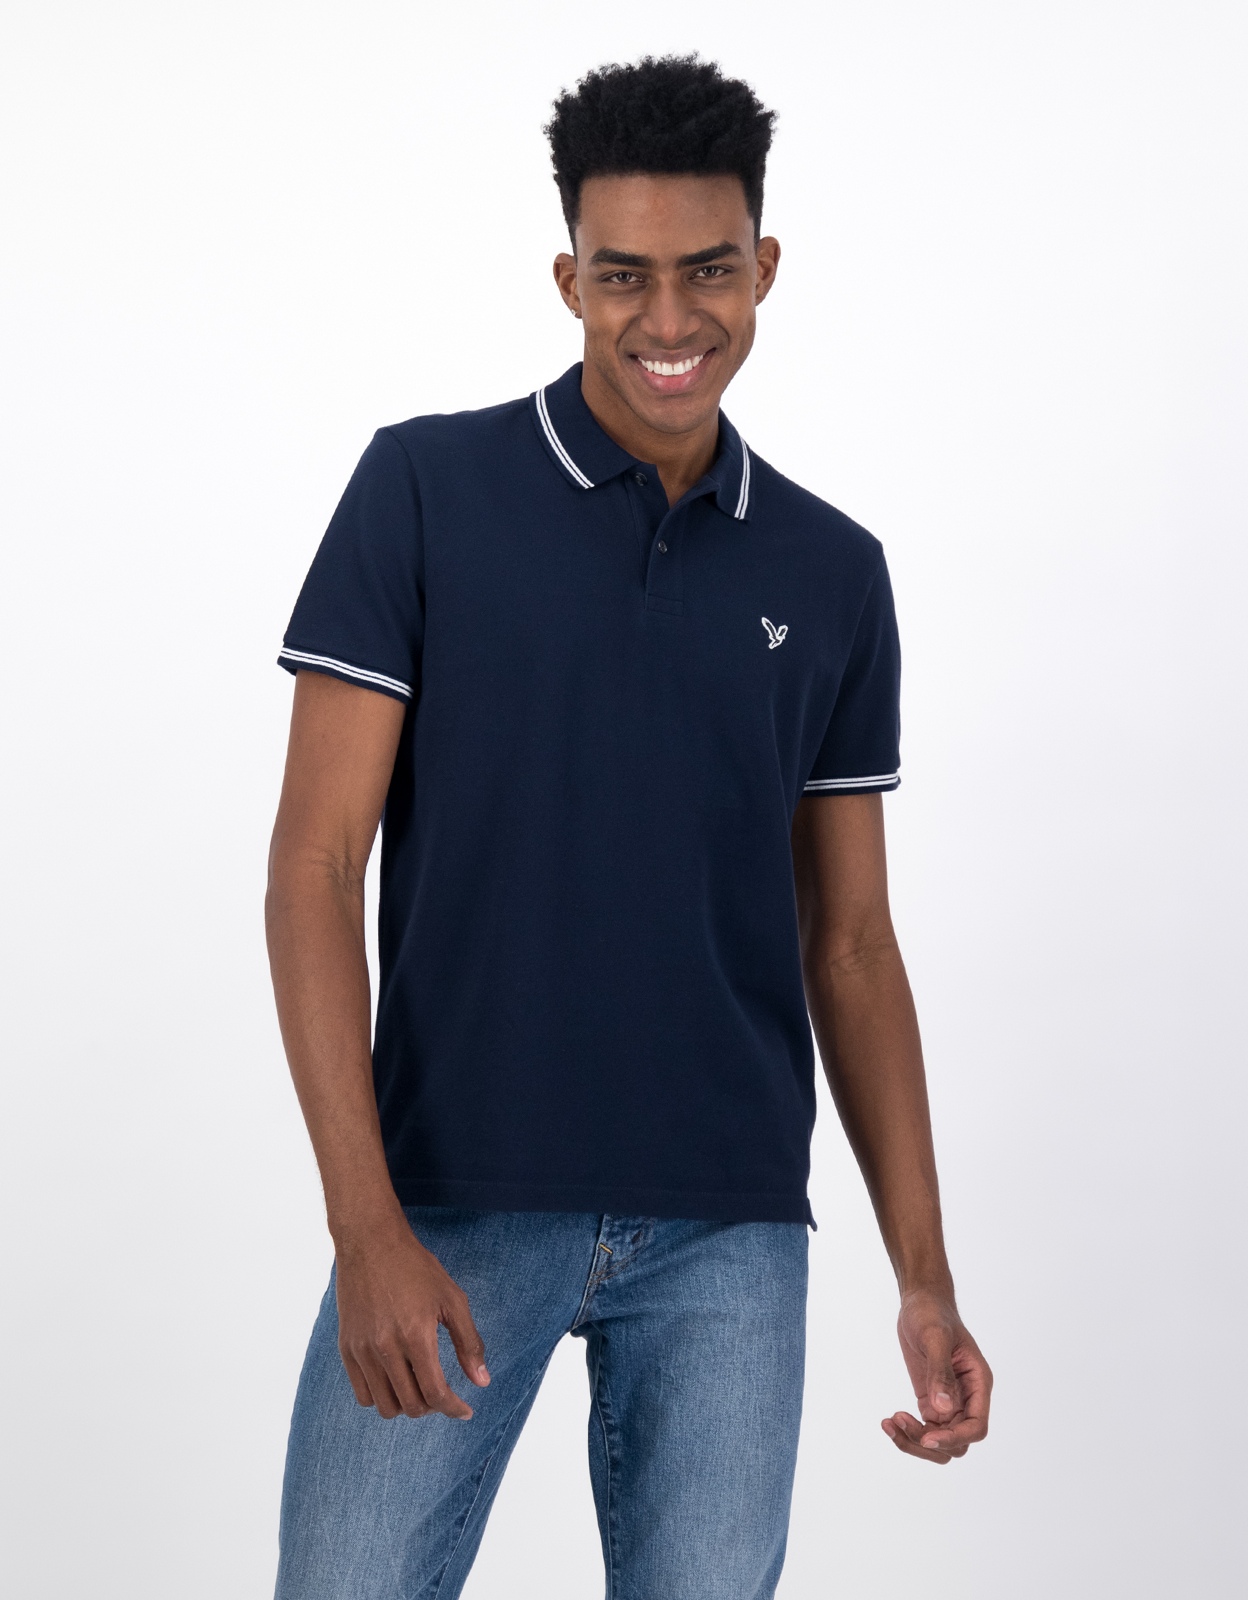 Buy AE Pique Polo Shirt online | American Eagle Outfitters UAE